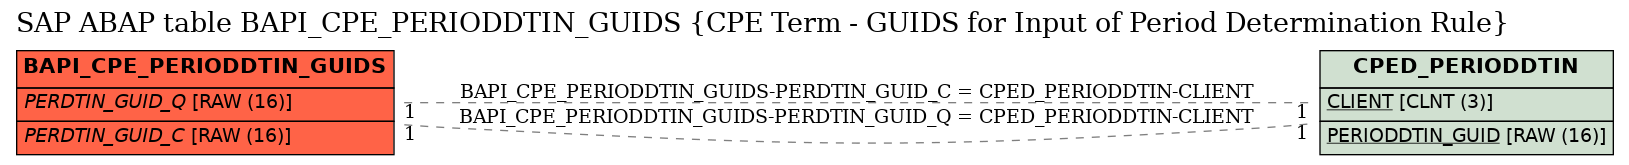 E-R Diagram for table BAPI_CPE_PERIODDTIN_GUIDS (CPE Term - GUIDS for Input of Period Determination Rule)